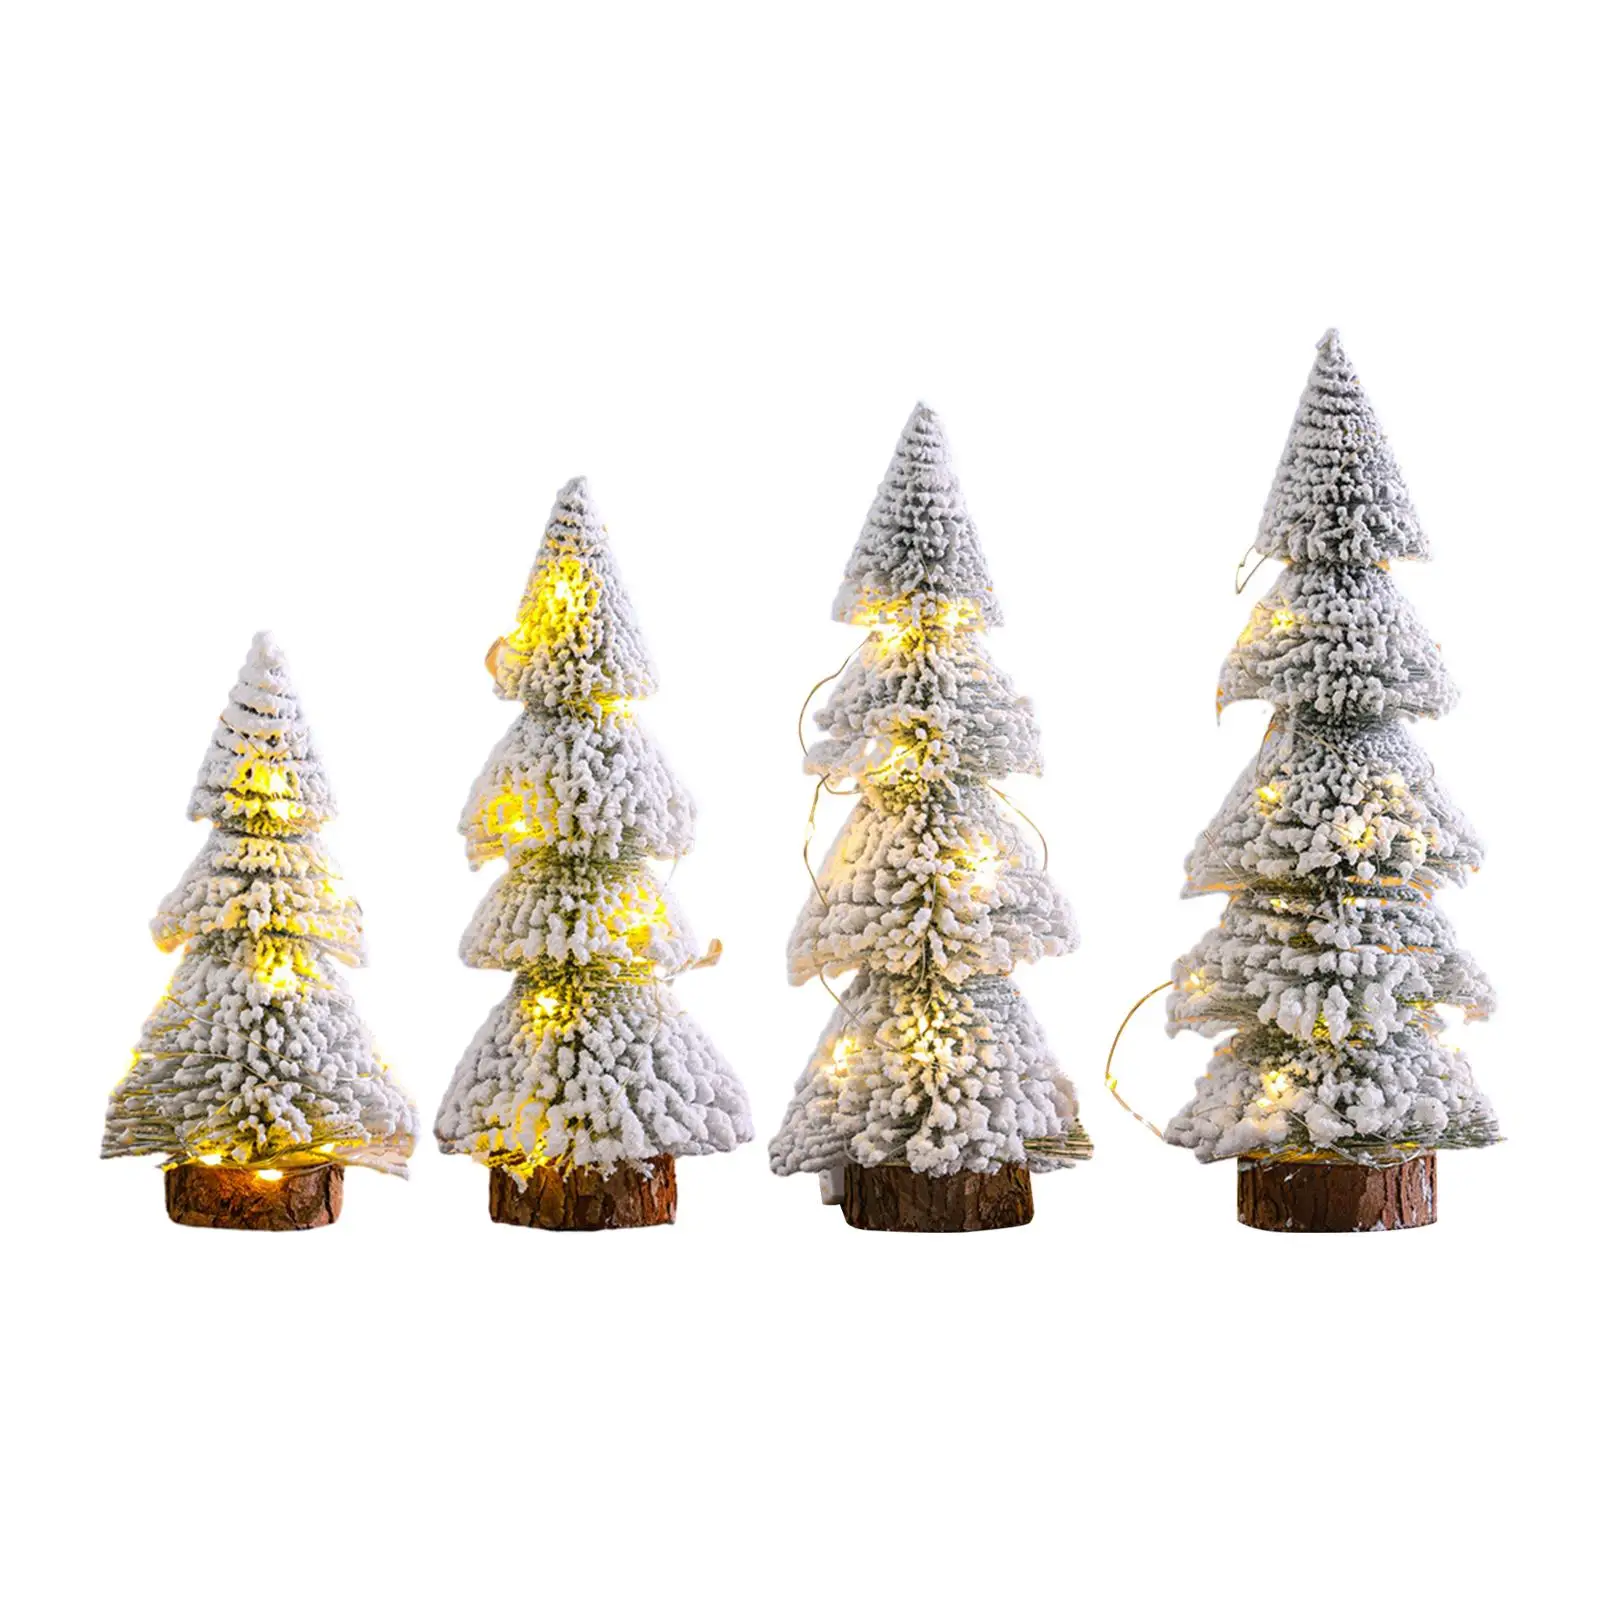 Snow Flocked Christmas Tree Ornament Display Party with LED Lights Tabletop Christmas Tree for Desk Holiday Indoor Shelf Decor